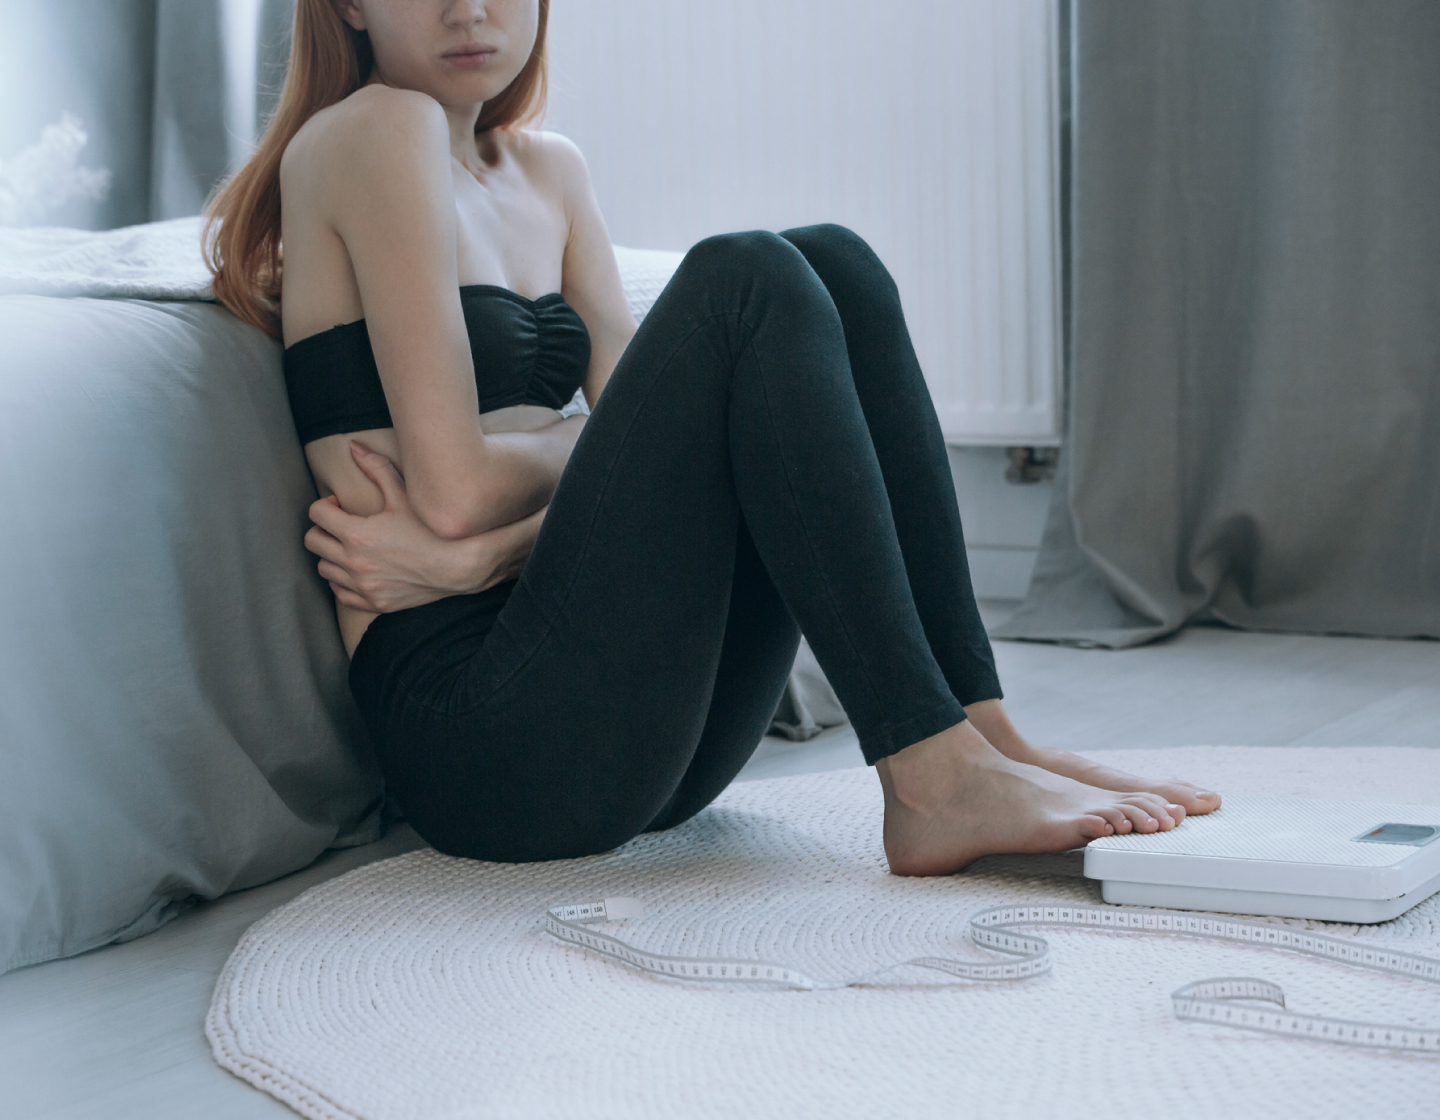 Eating Disorders: Treatment, Prevention, And What Parents Should Notice